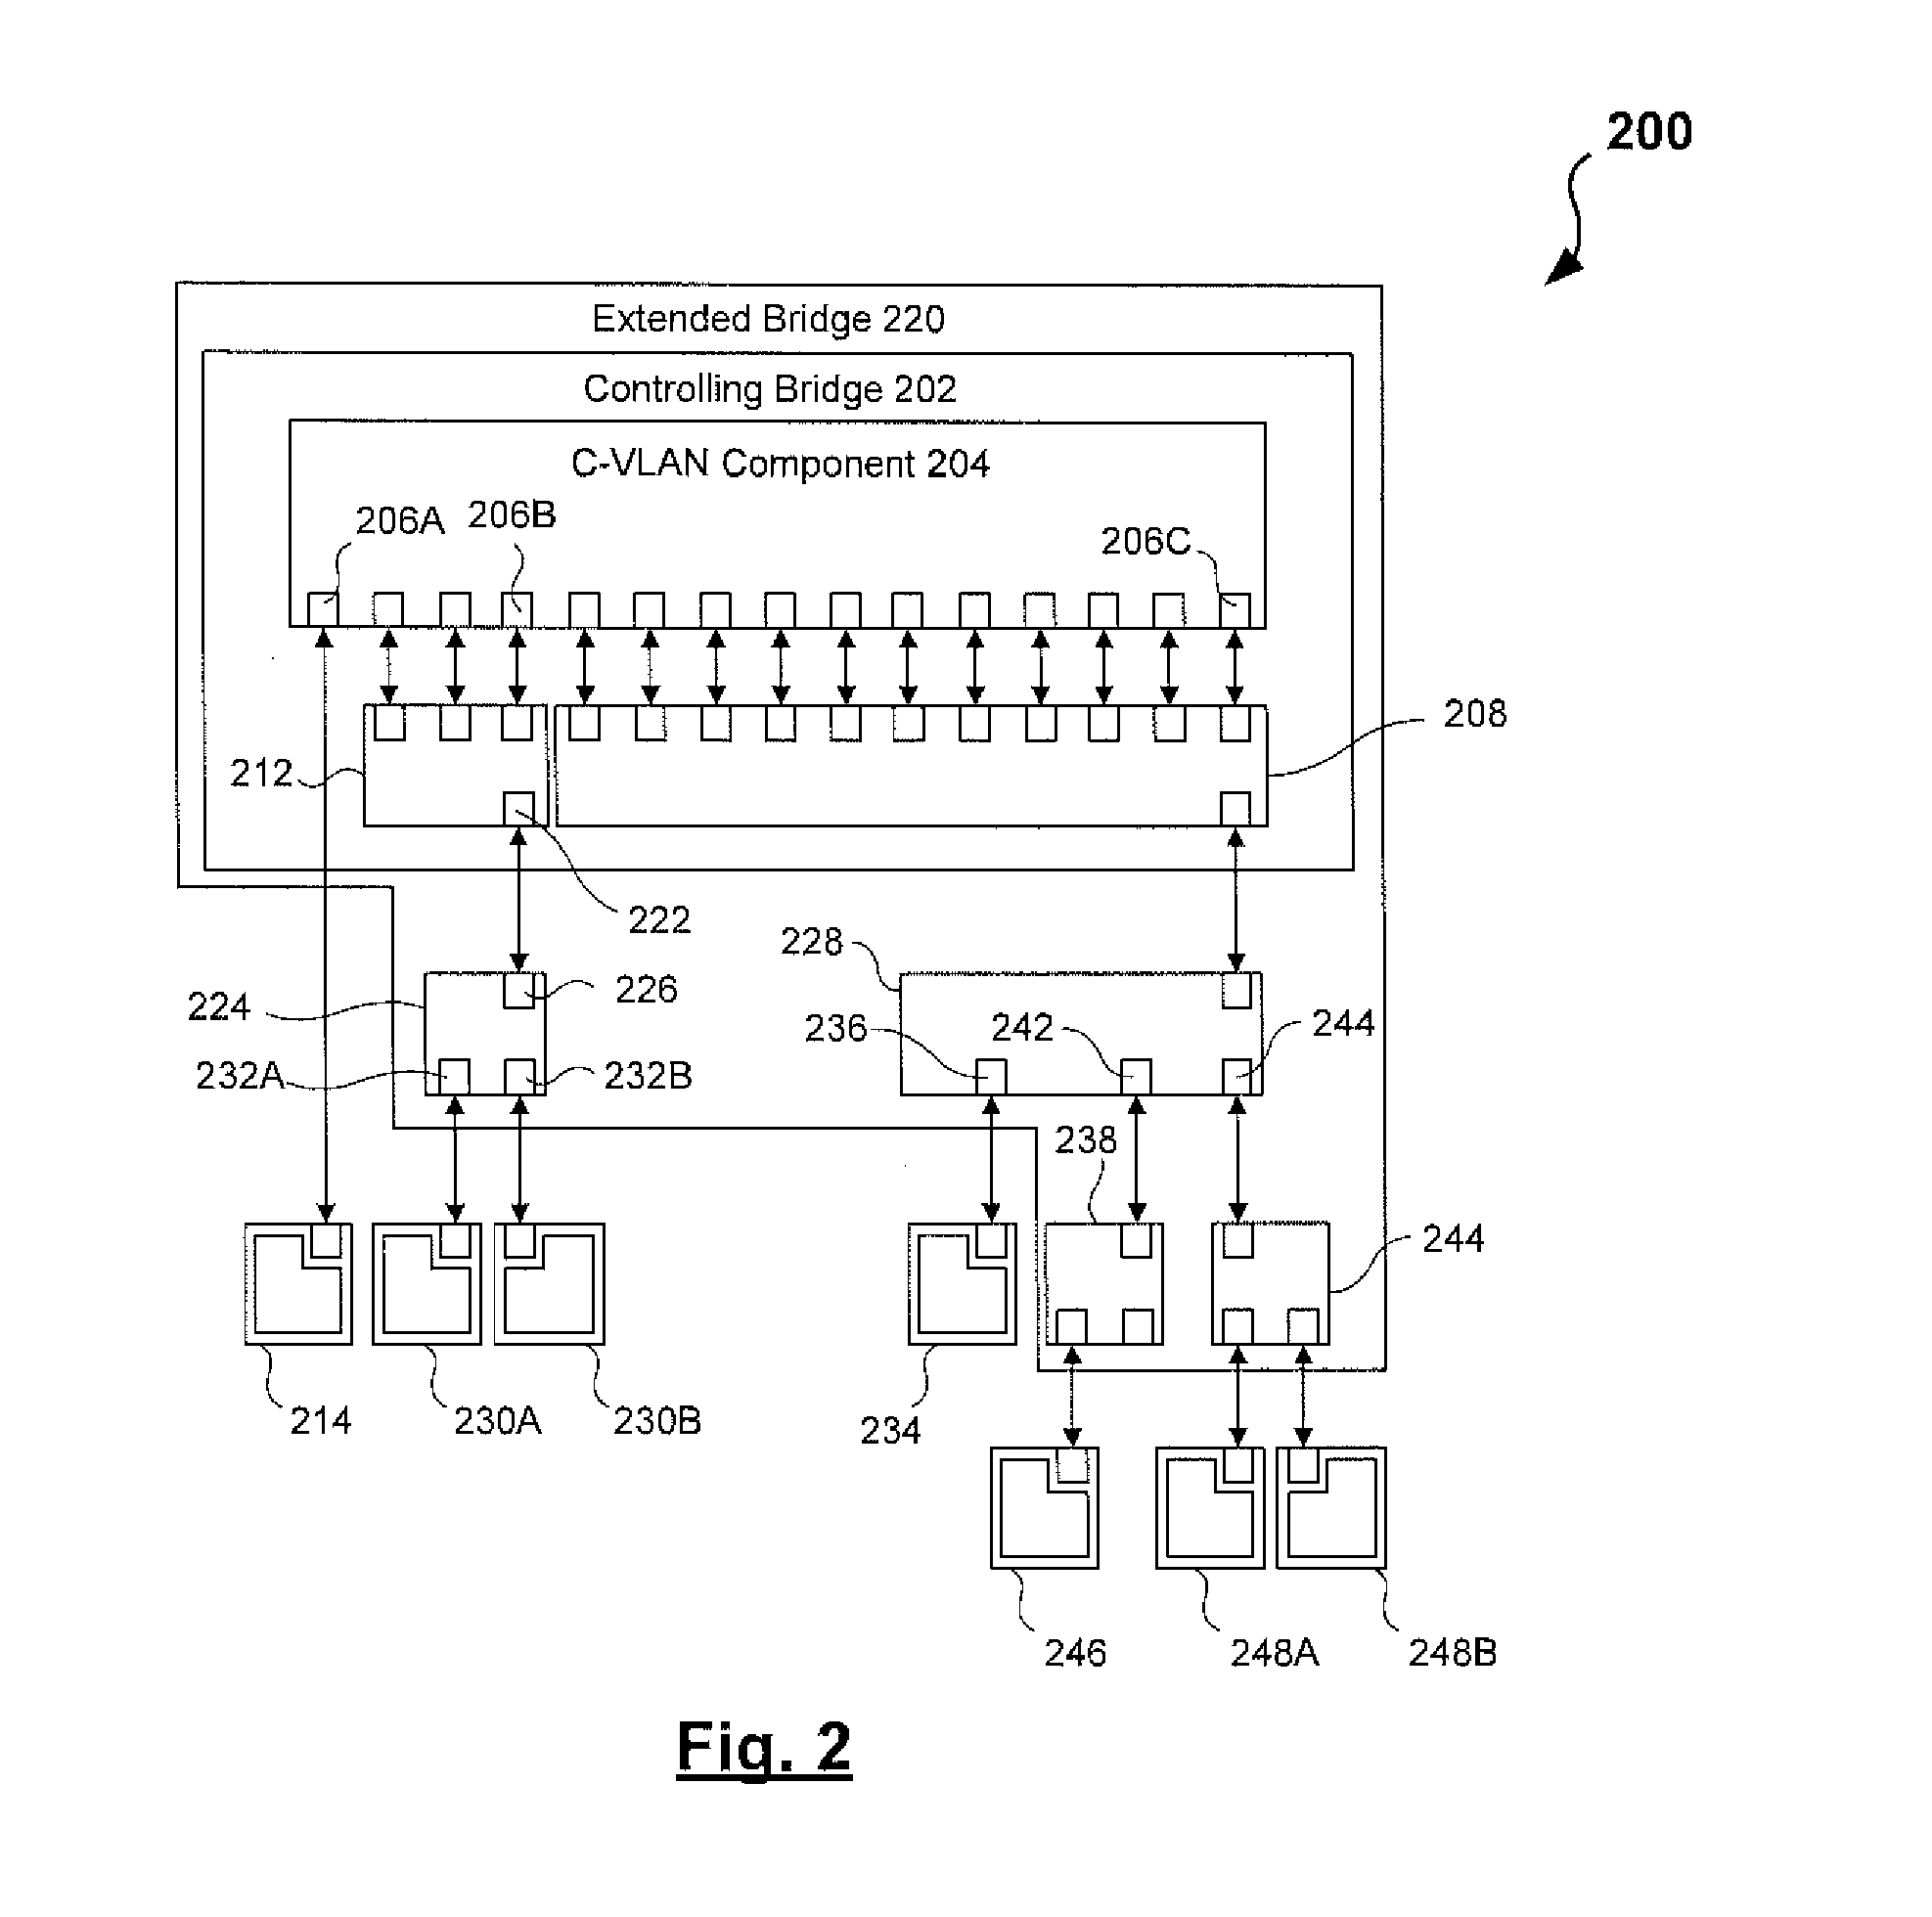 Systems and methods for integrating wireless local area networks on extended bridges